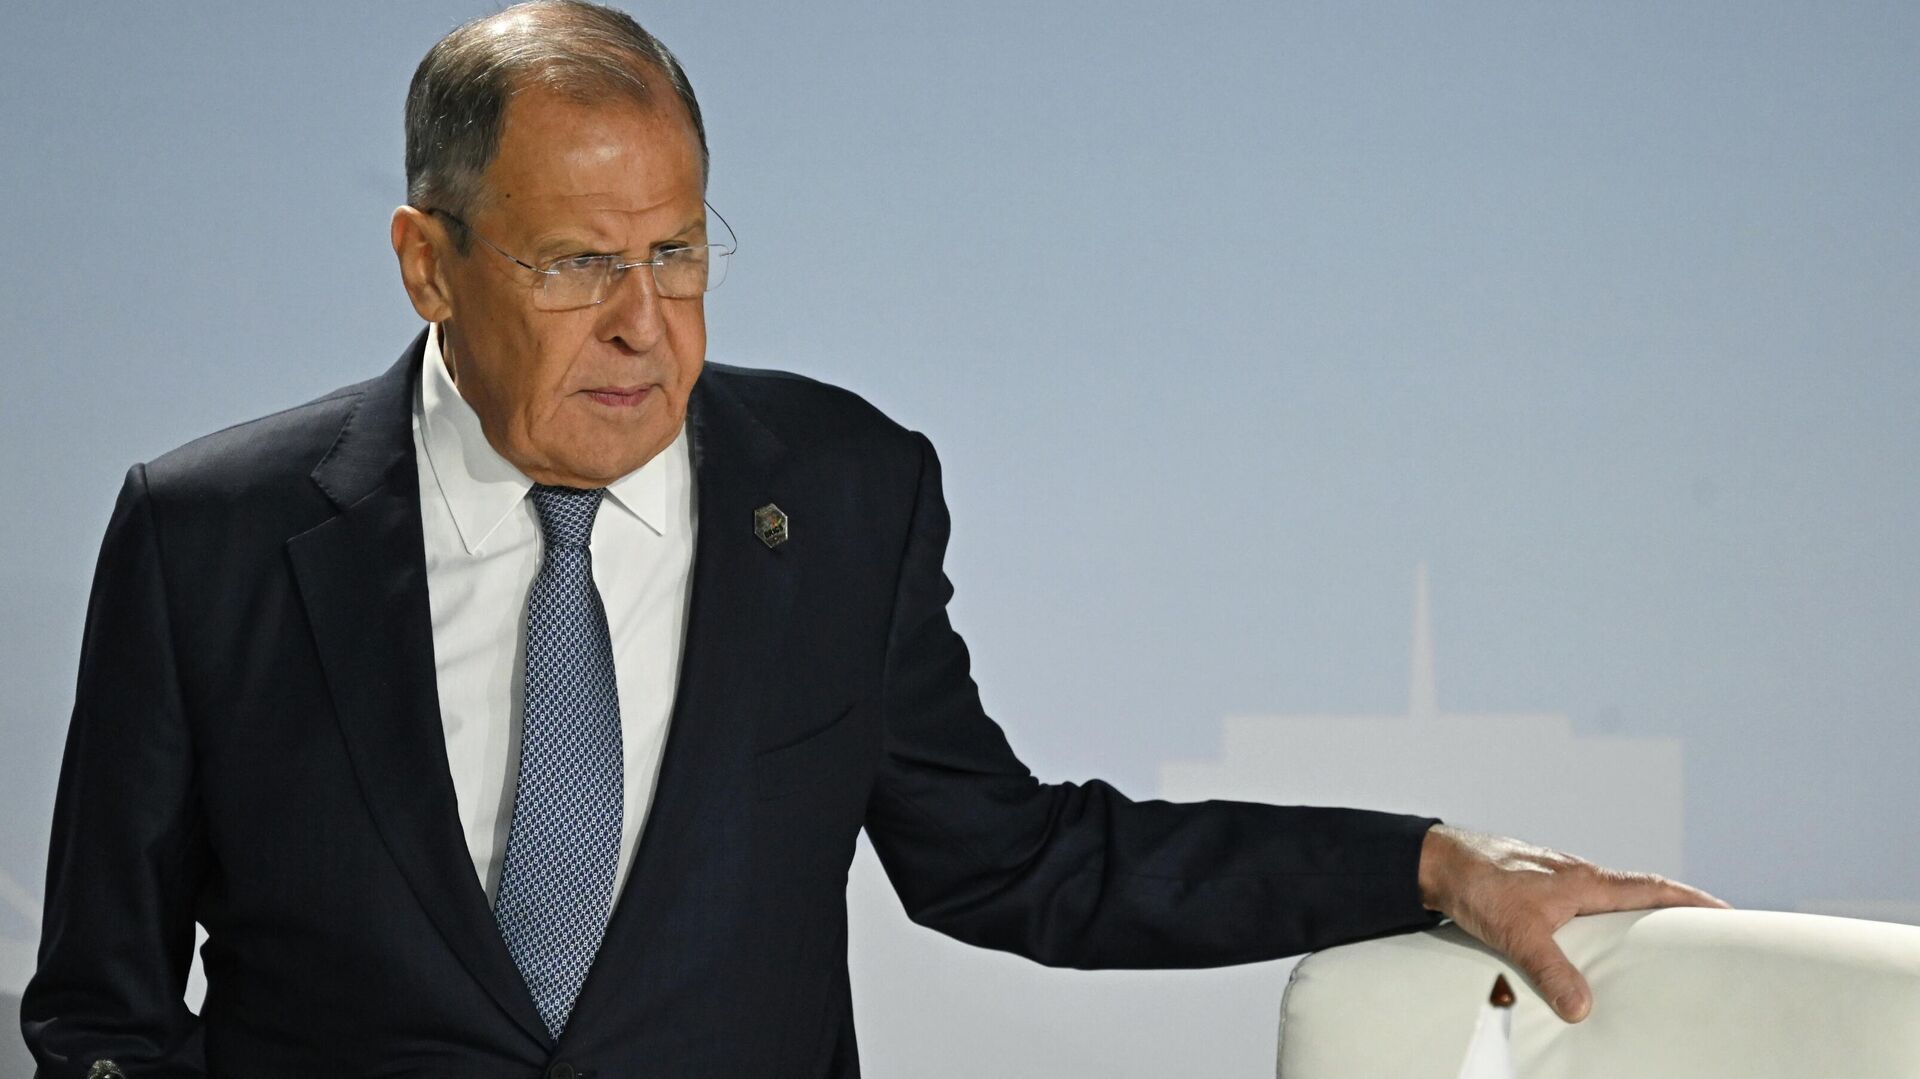 Russian Foreign Minister Sergey Lavrov at the closing press conference after the joint meeting of BRICS leaders with leaders of invited countries and multilateral organizations. - Sputnik International, 1920, 24.08.2023